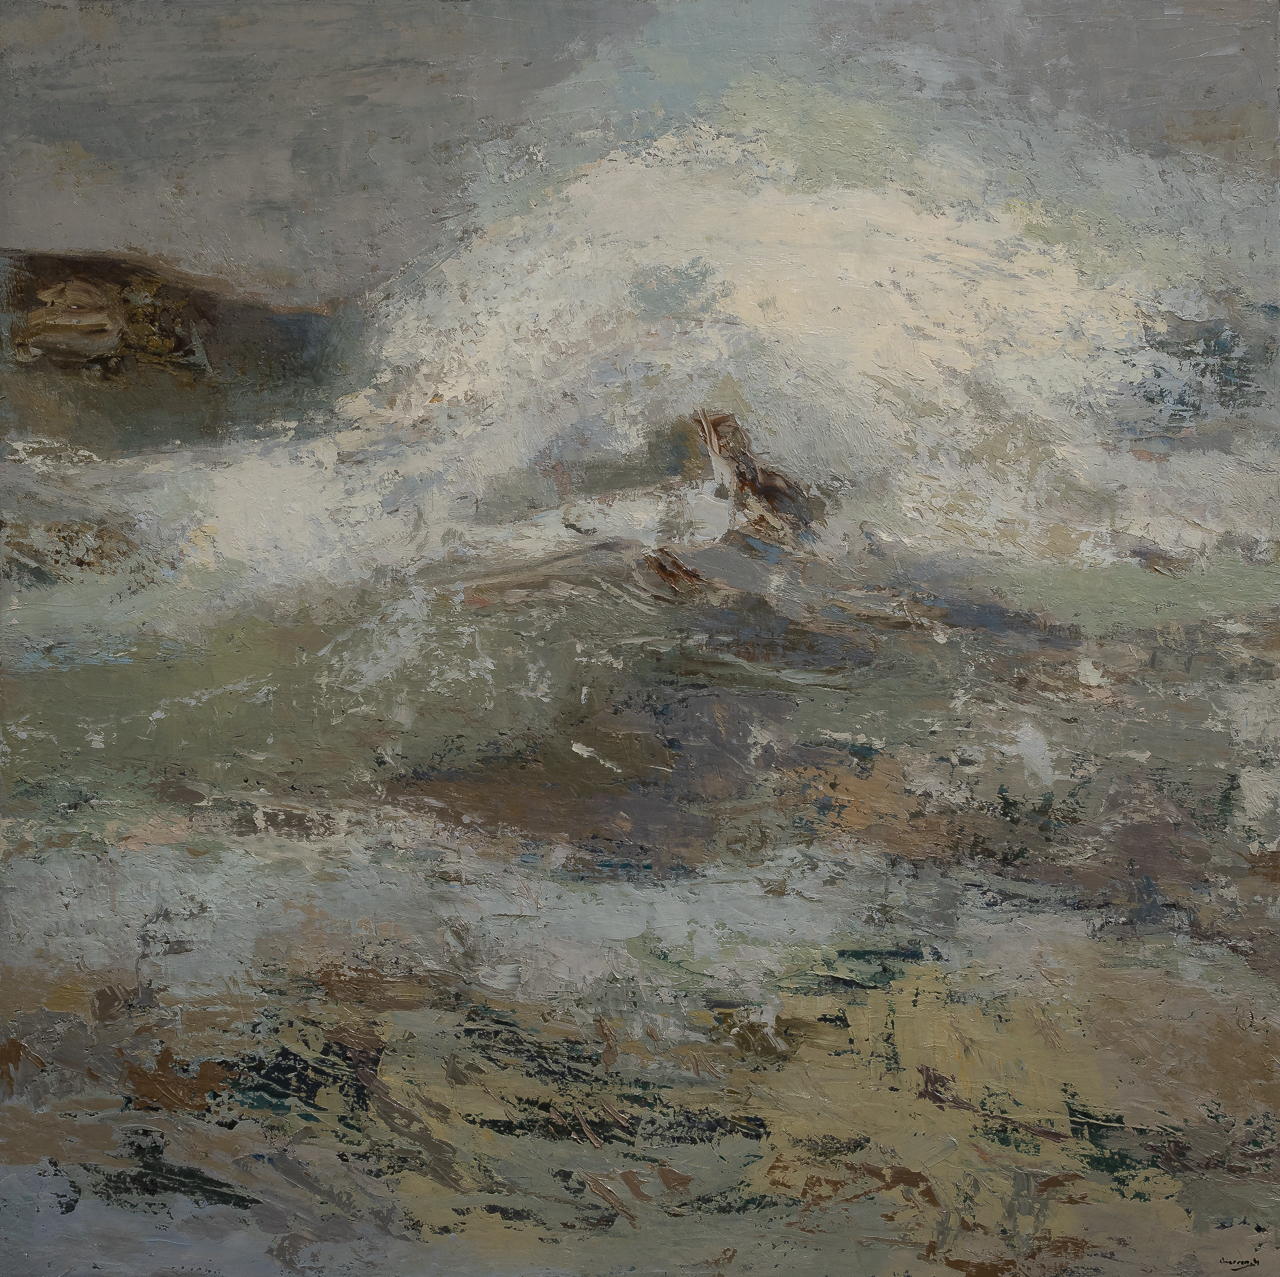 Oil on canvas painting from the Seascape series, by spanish artist Jose Maria Guerrero Medina